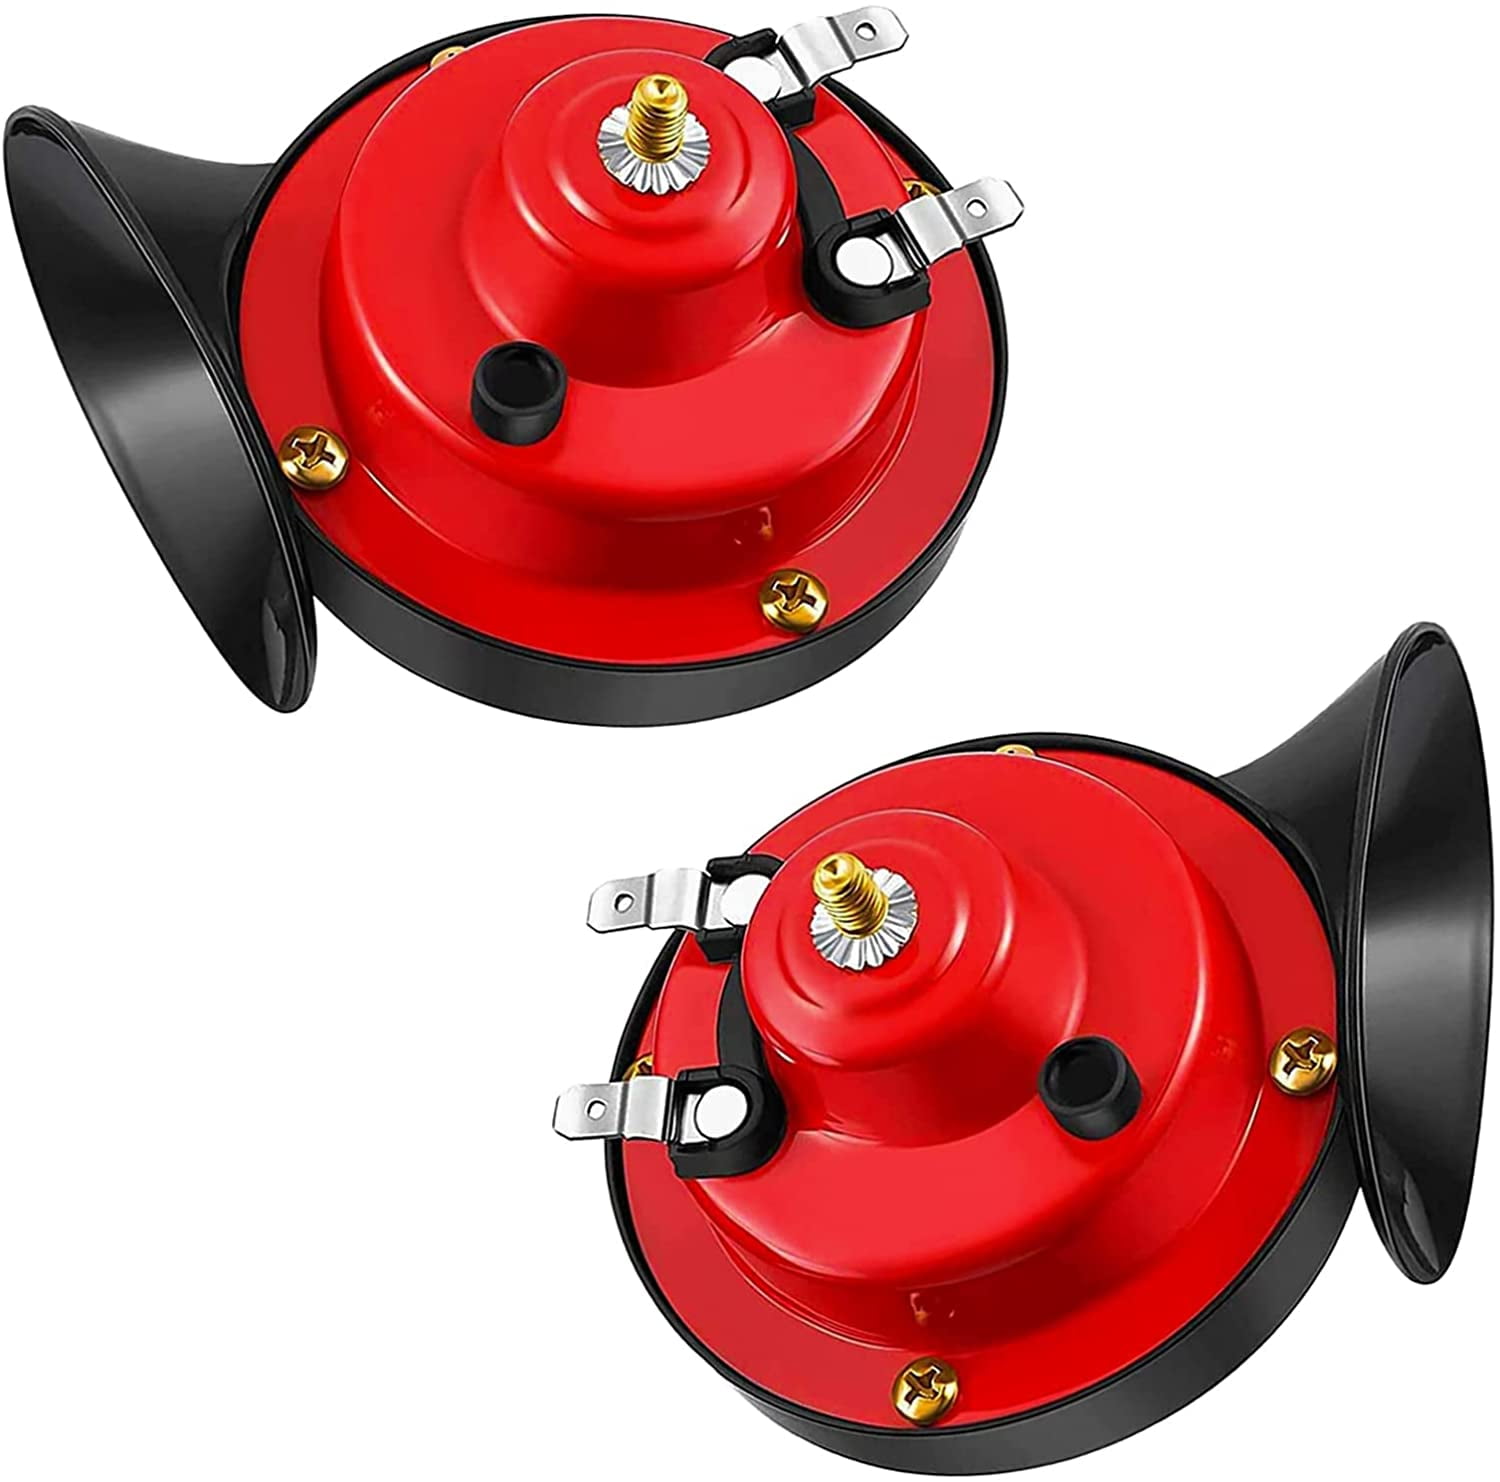 2 Pcs 12V 300DB Electric Snail Horn Set Super Loud Waterproof Air Horn Raging Sound for Train Motorcycle Car Truck Boat 